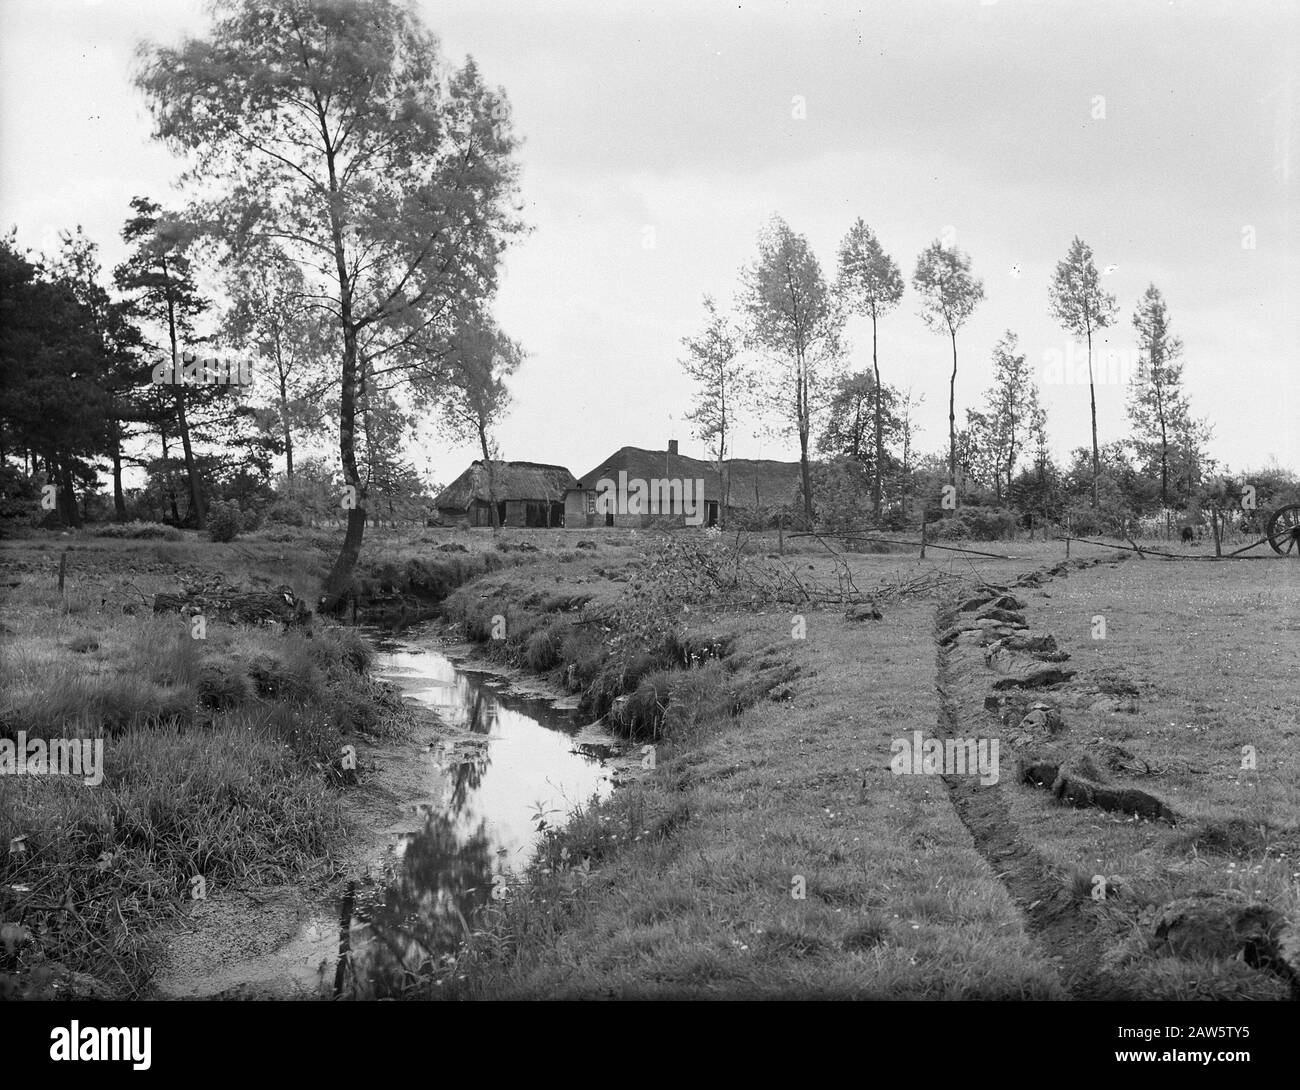 normalization of streams, digging and filling in trenches, laying drains, culverts and hedge, streams, old Rosep new laap Date: undated Keywords: streams, culverts and hedge, digging and filling in trenches, laying drains, normalization of streams Person Name: new laap old Rosep Stock Photo